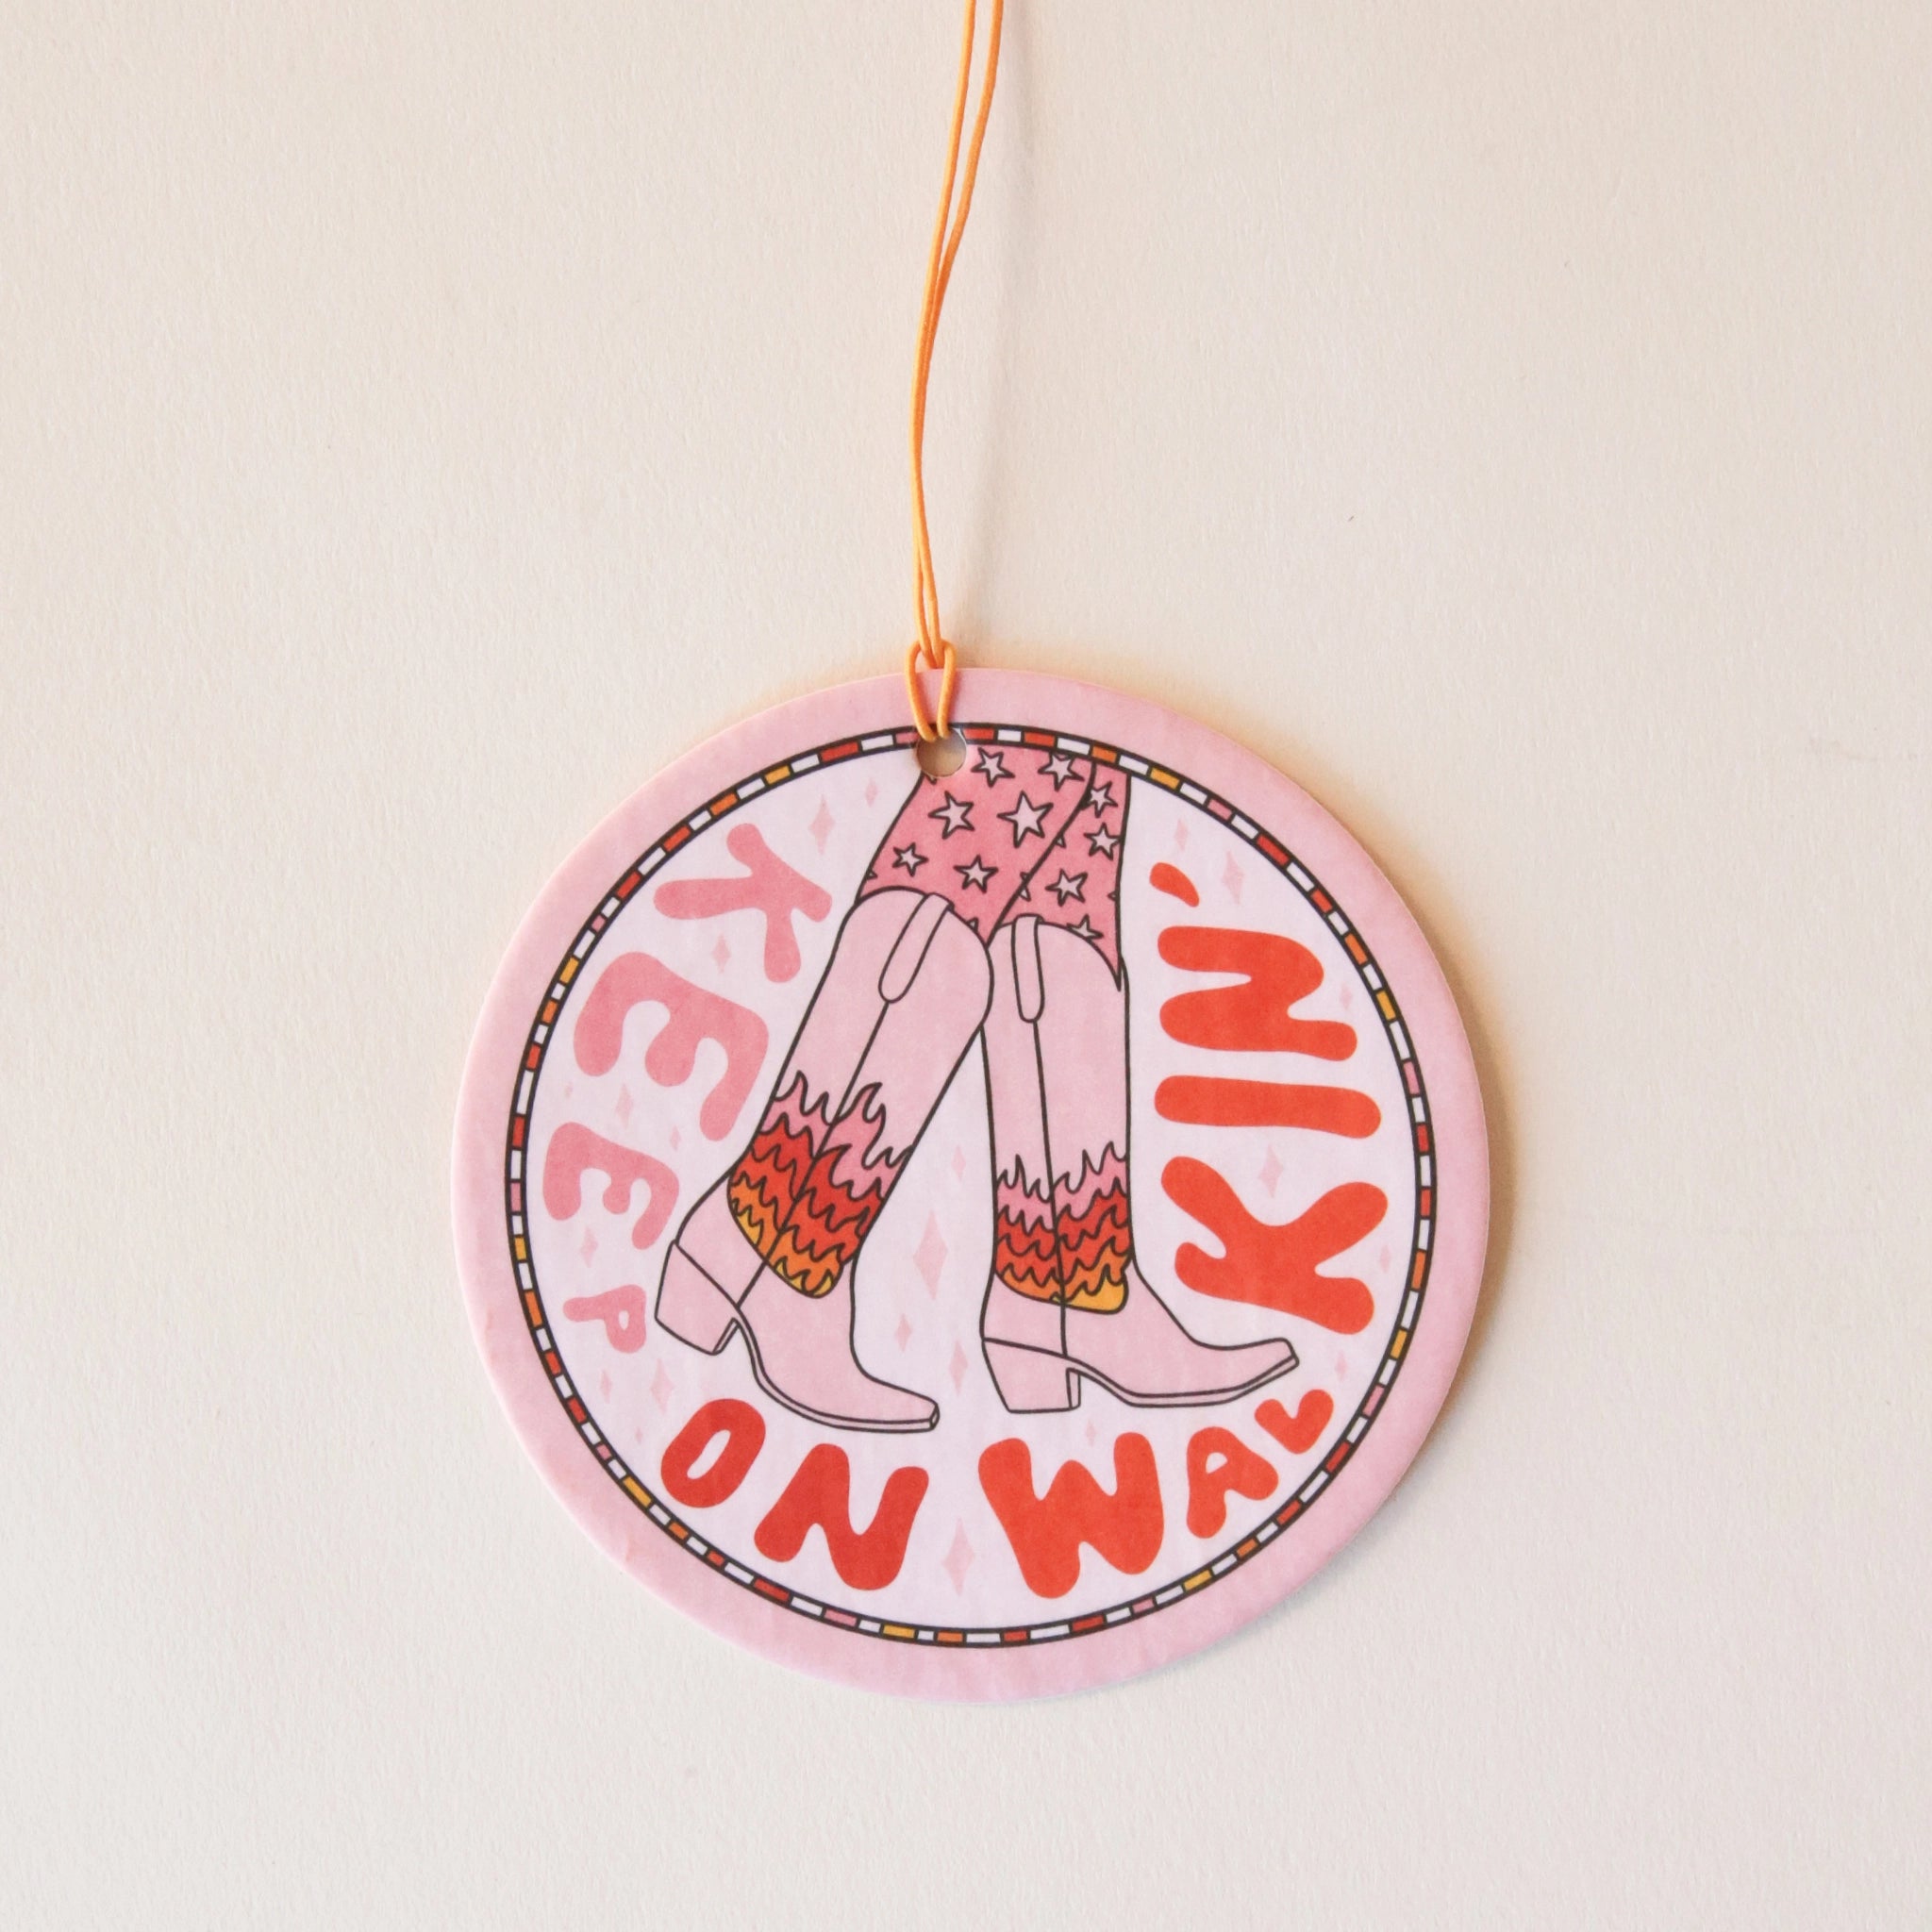 A light pink circle air freshener with a elastic loop for hanging and a cowgirl boot graphic with fire details on them and text that reads, "Keep On Walking'" in keep and red text around the edge of the air freshener. 